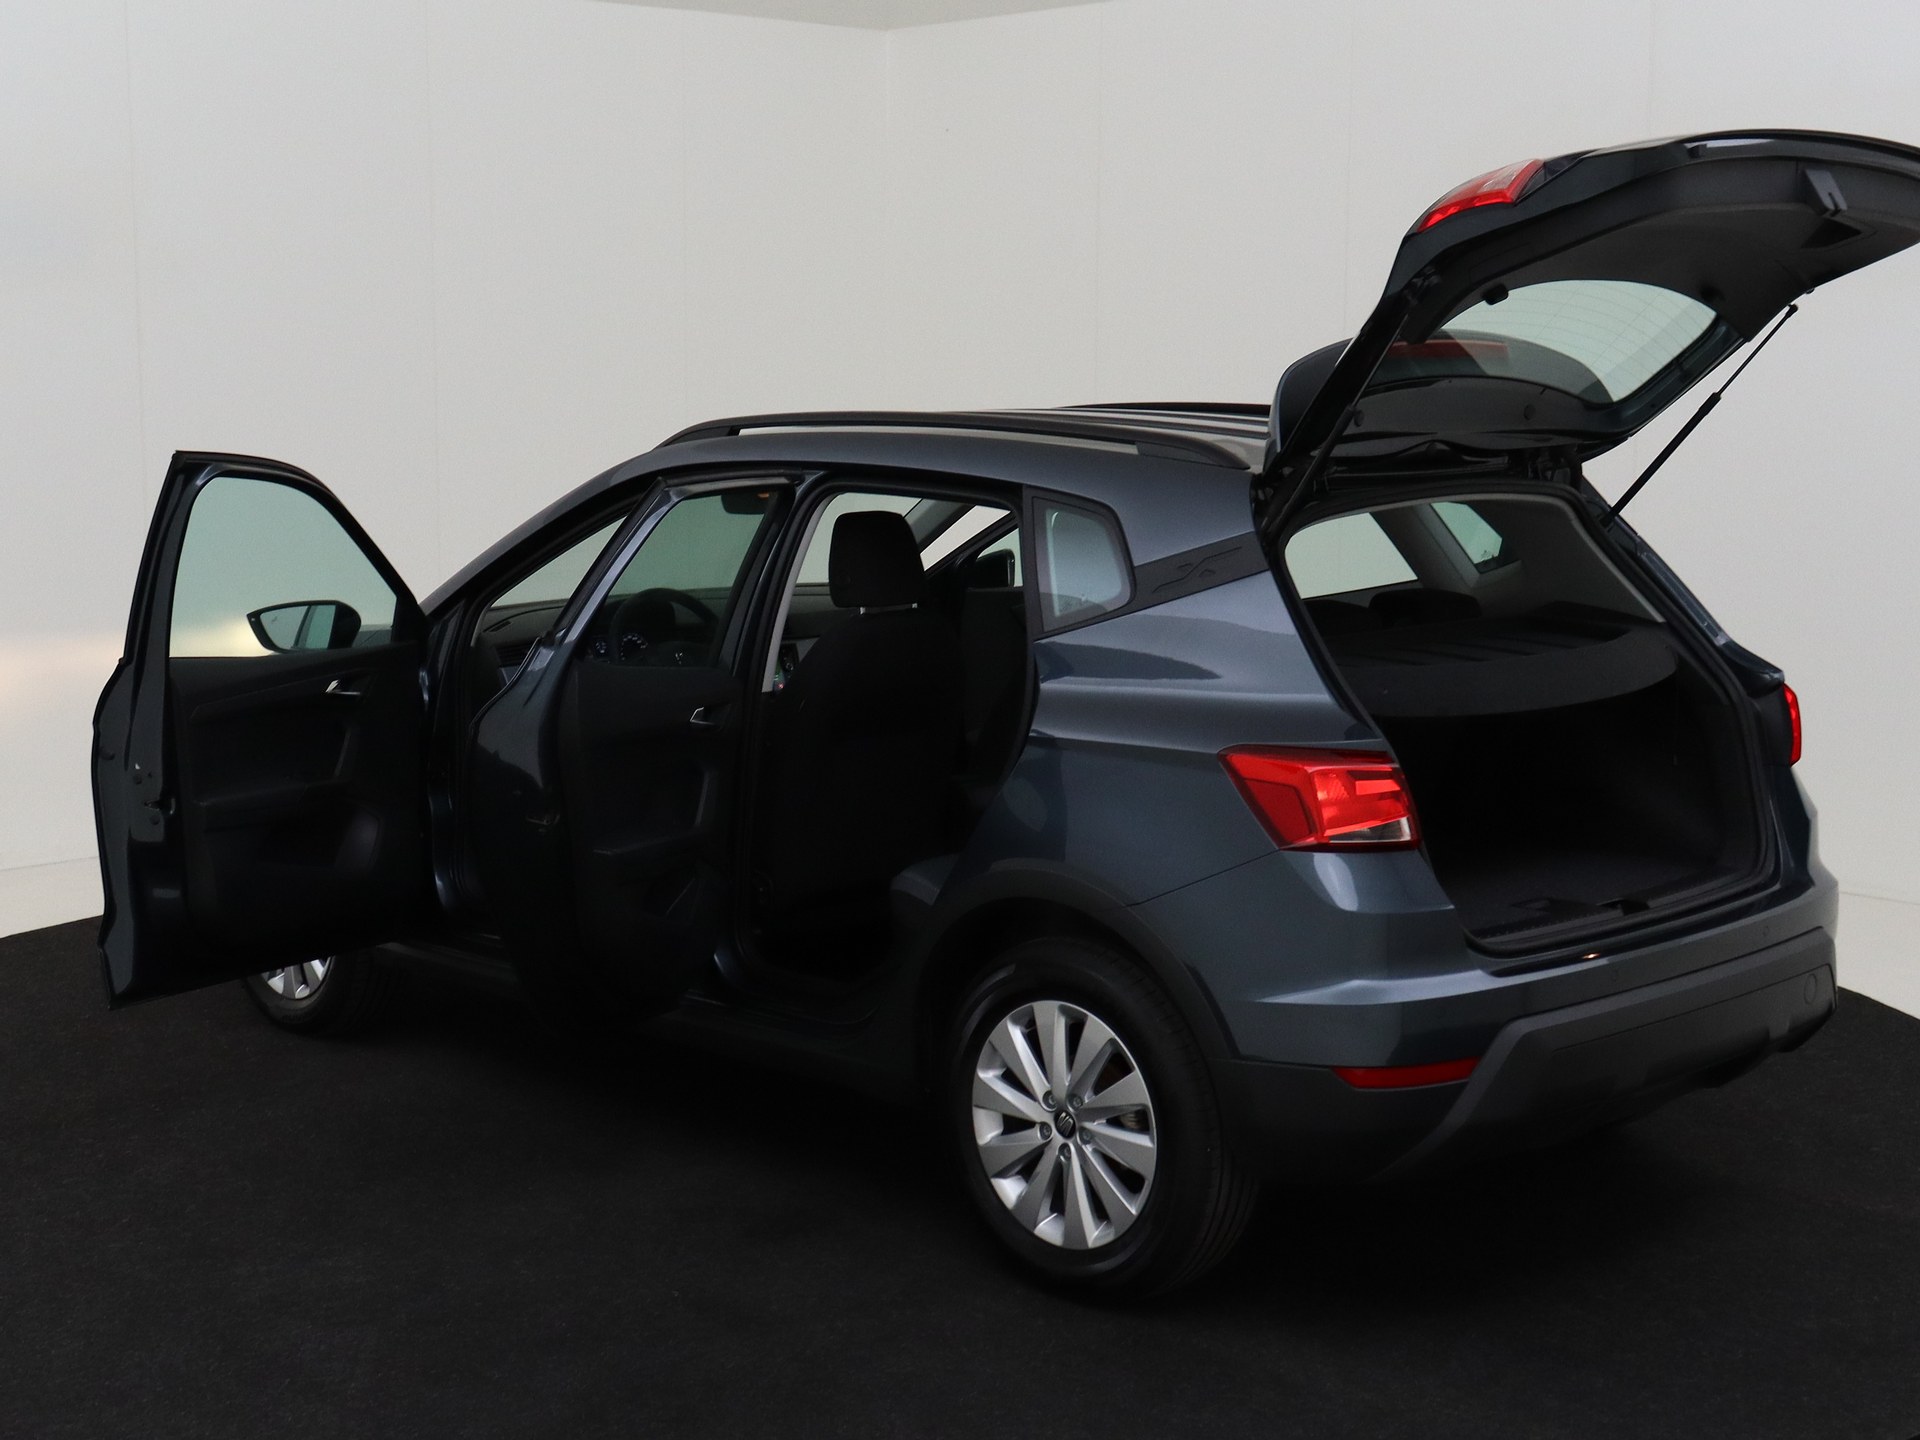 SEAT Arona 1.0 TSI Style van CarSelexy dealer Liewes Roden B.V in Roden